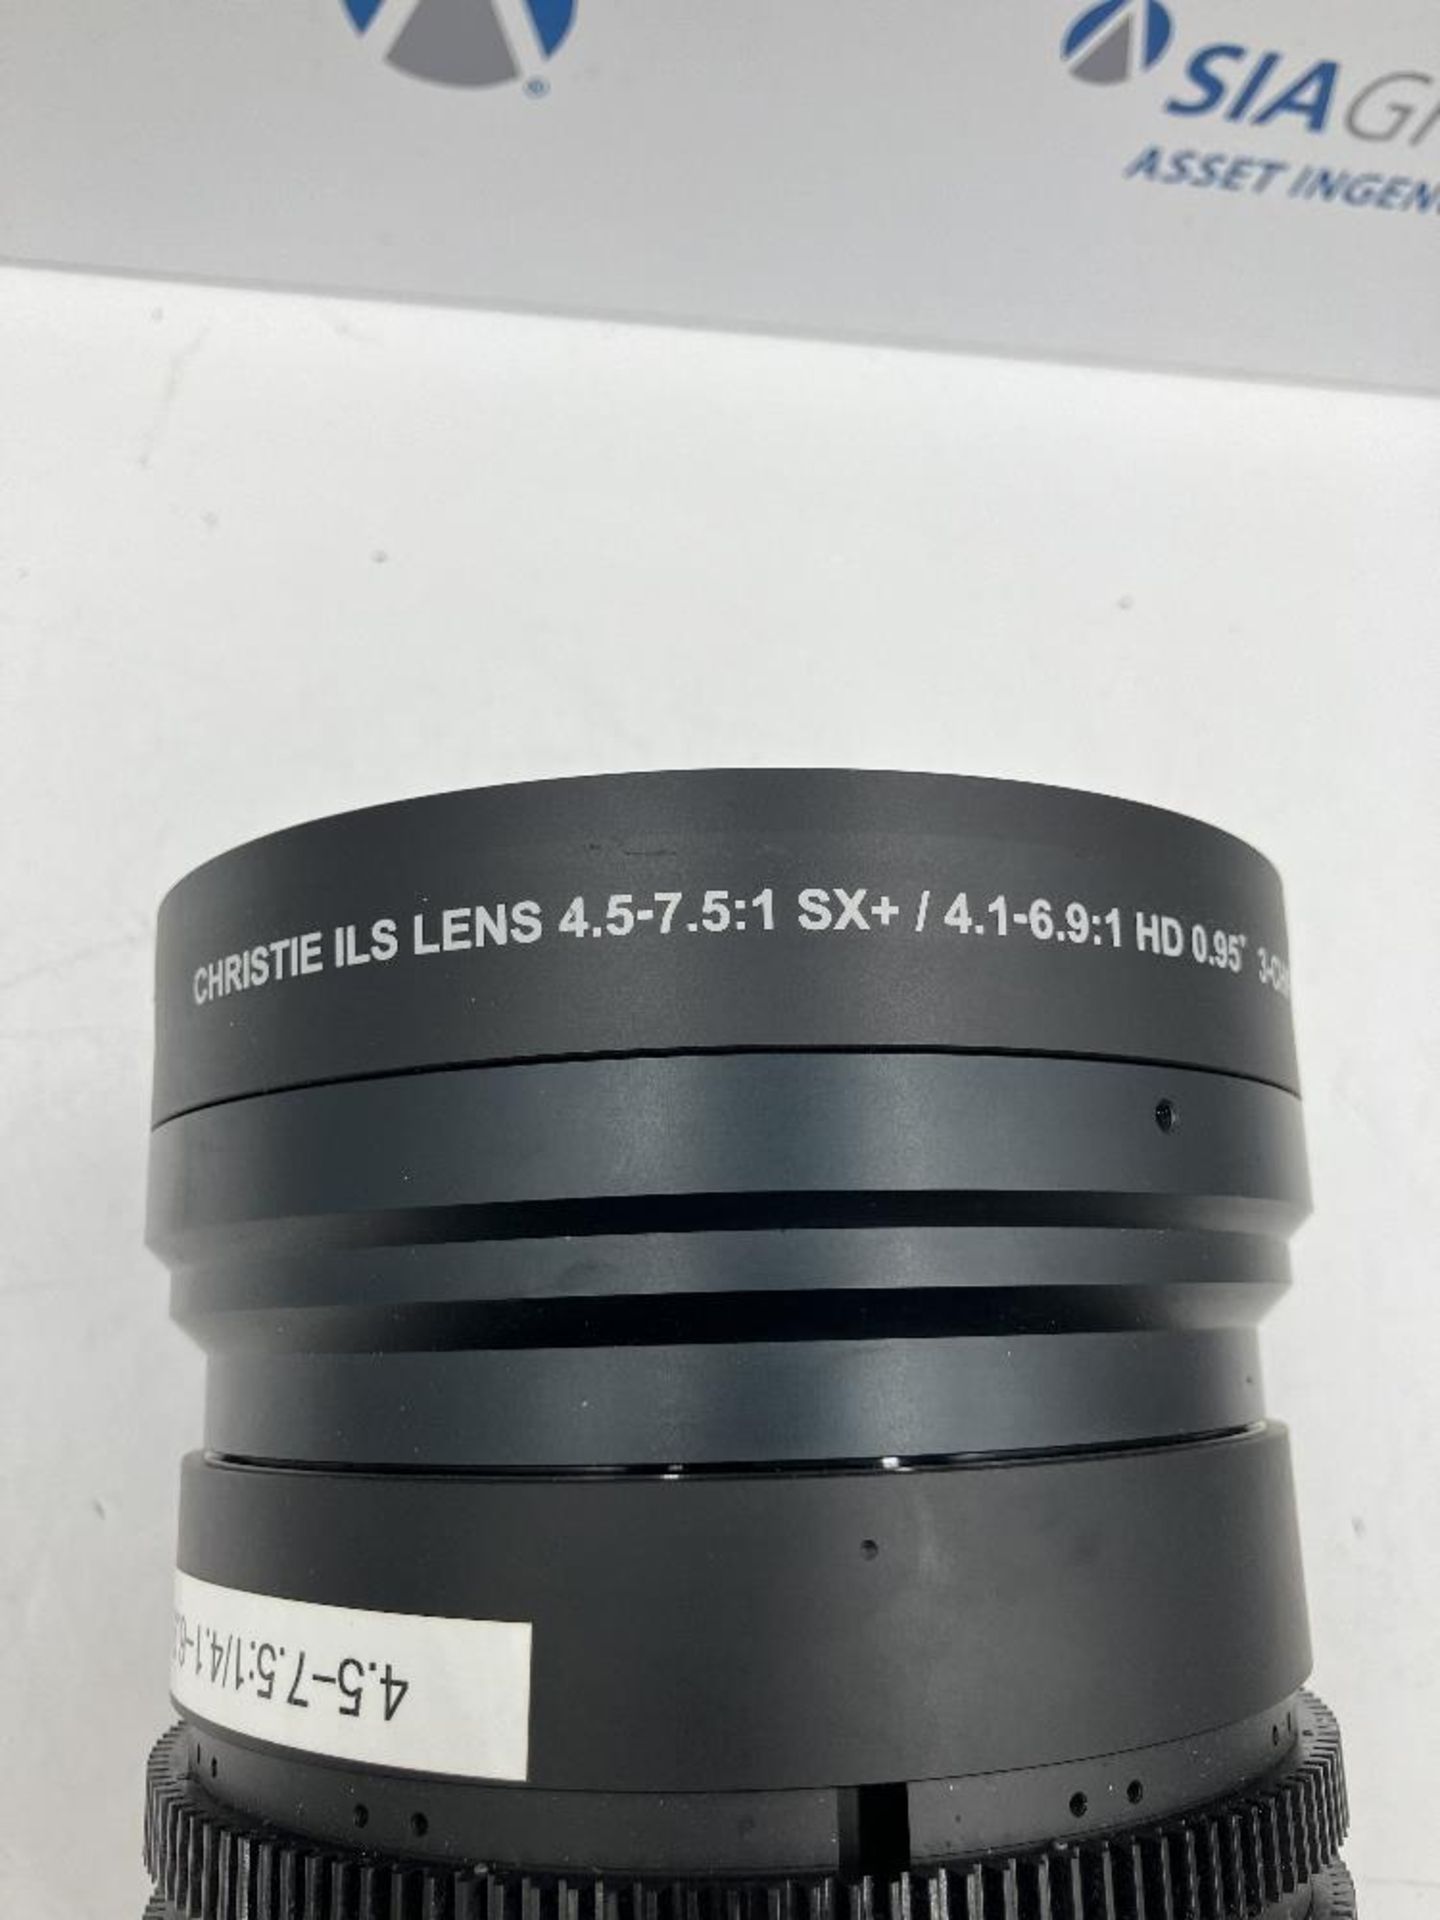 Christie ILS M-Series HD Lens 4.5-7.5 With Flight Case - Image 5 of 8